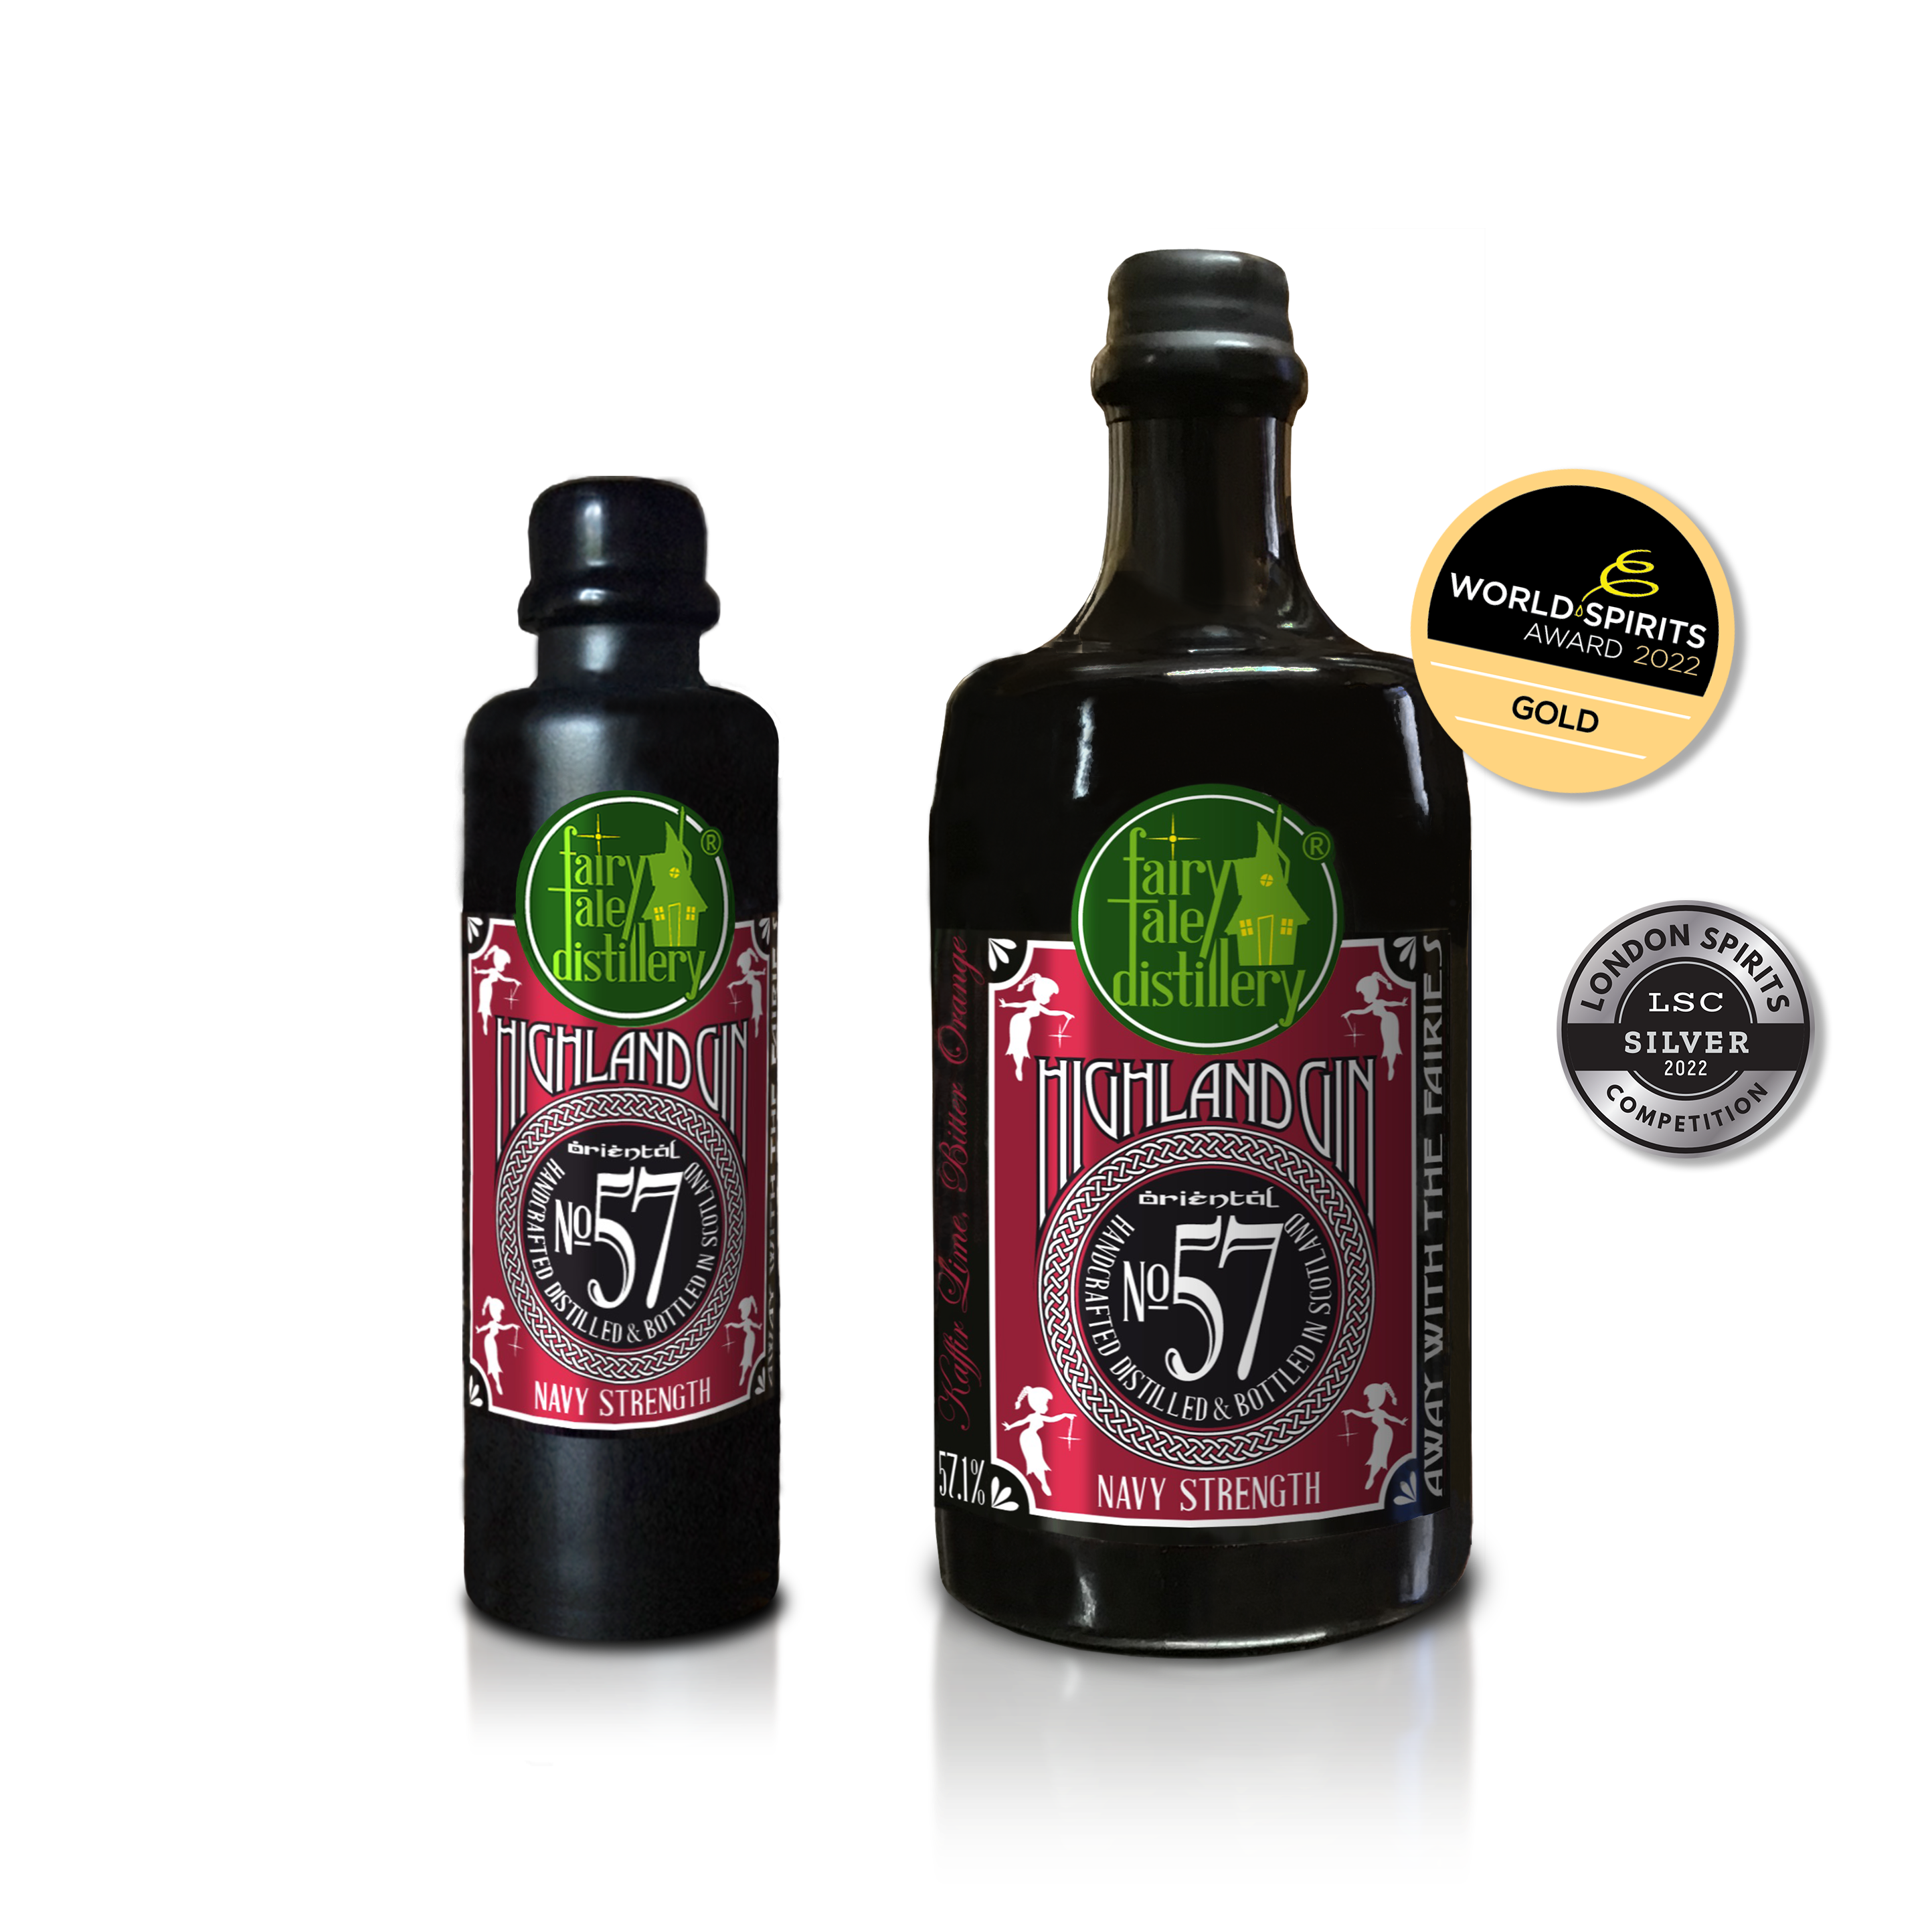 No 57 Navy Strength Oriental Gin bottle from Fairytale Distillery with World Spirits Award 2022 Gold - London Spirits Competition 2022 Silver